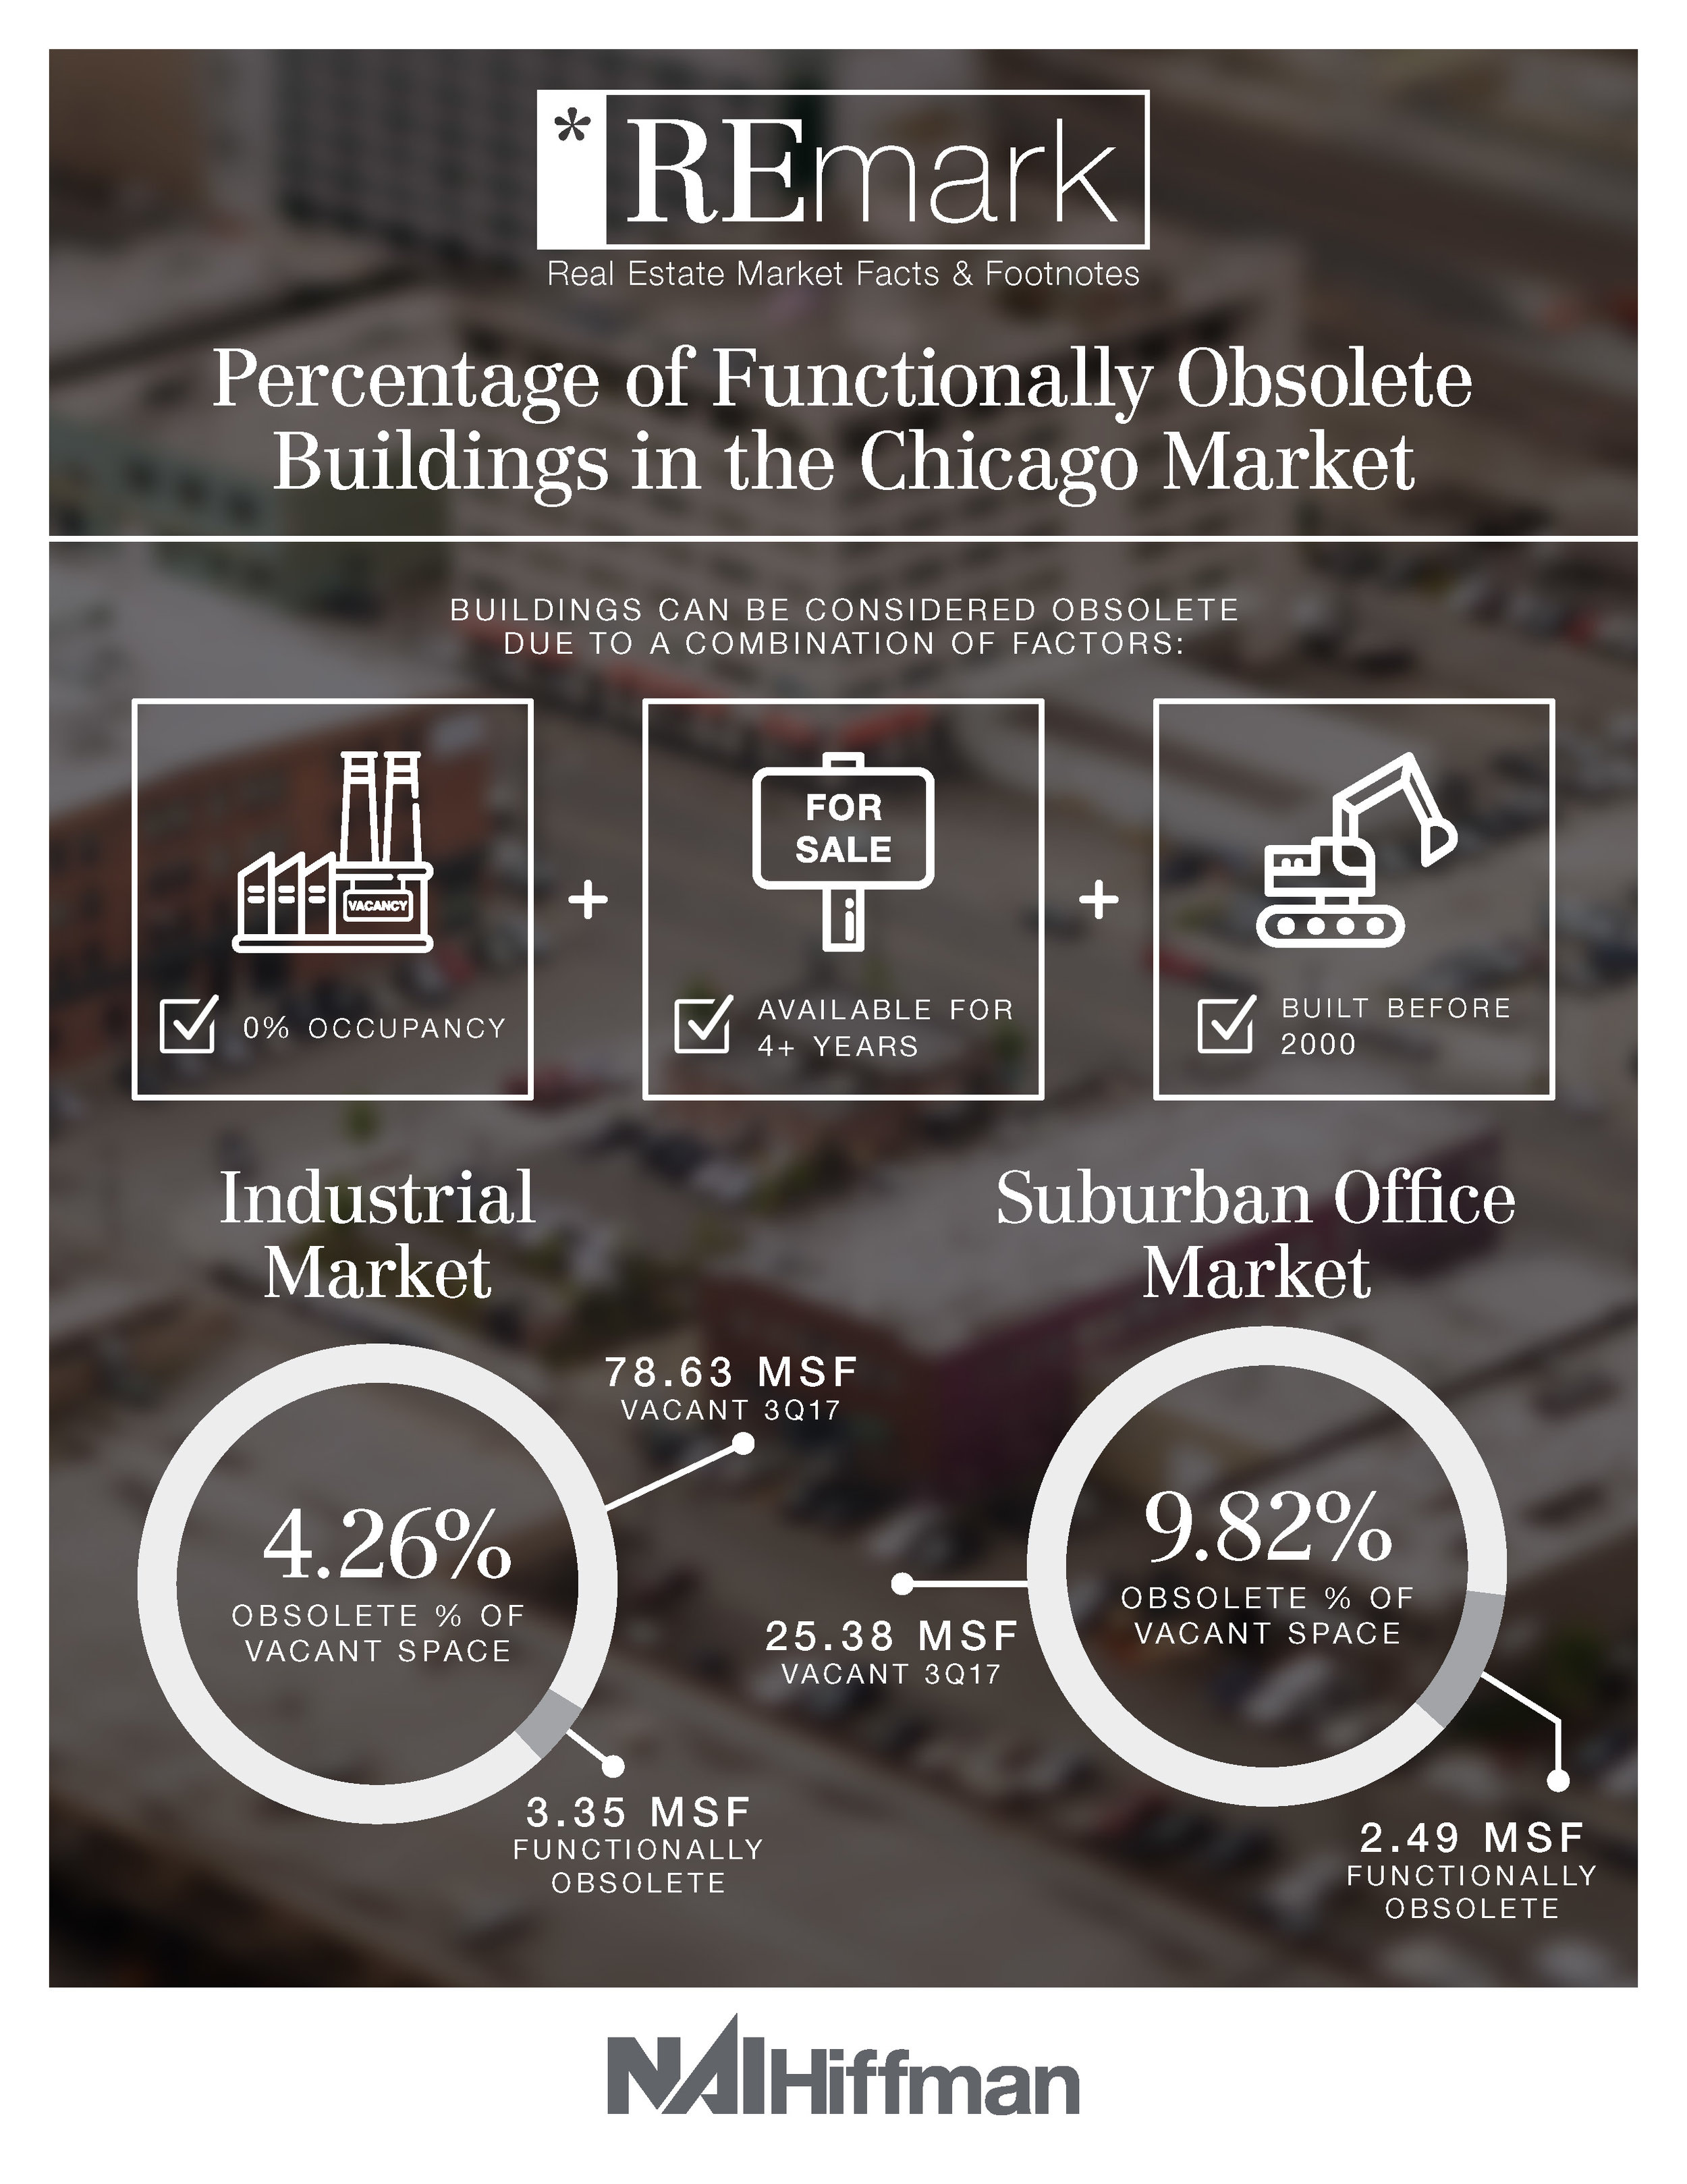 REmark: Percentage of Functionally Obsolete Buildings in the Chicago Market